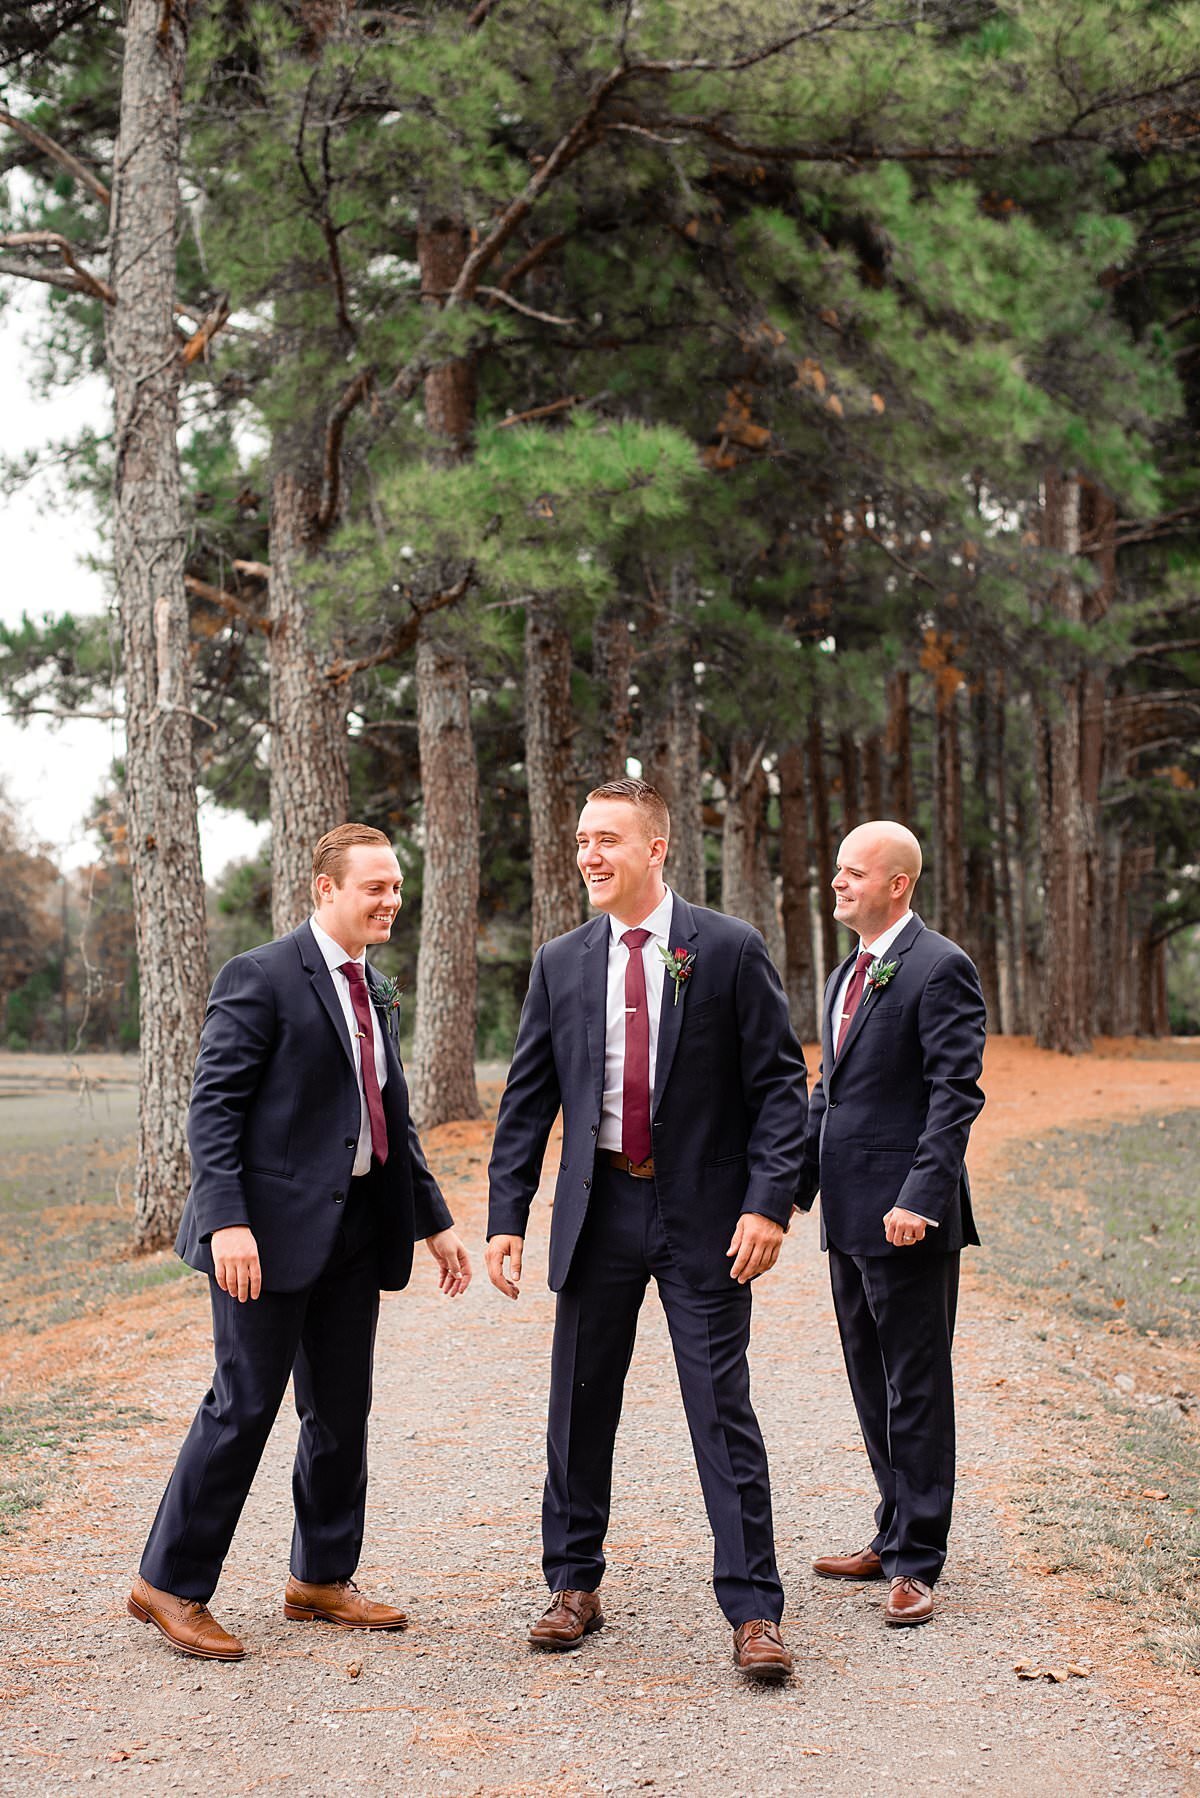 Groom and his 2 groomsmen laughing while on a gravel path with tall evergreen trees behind them